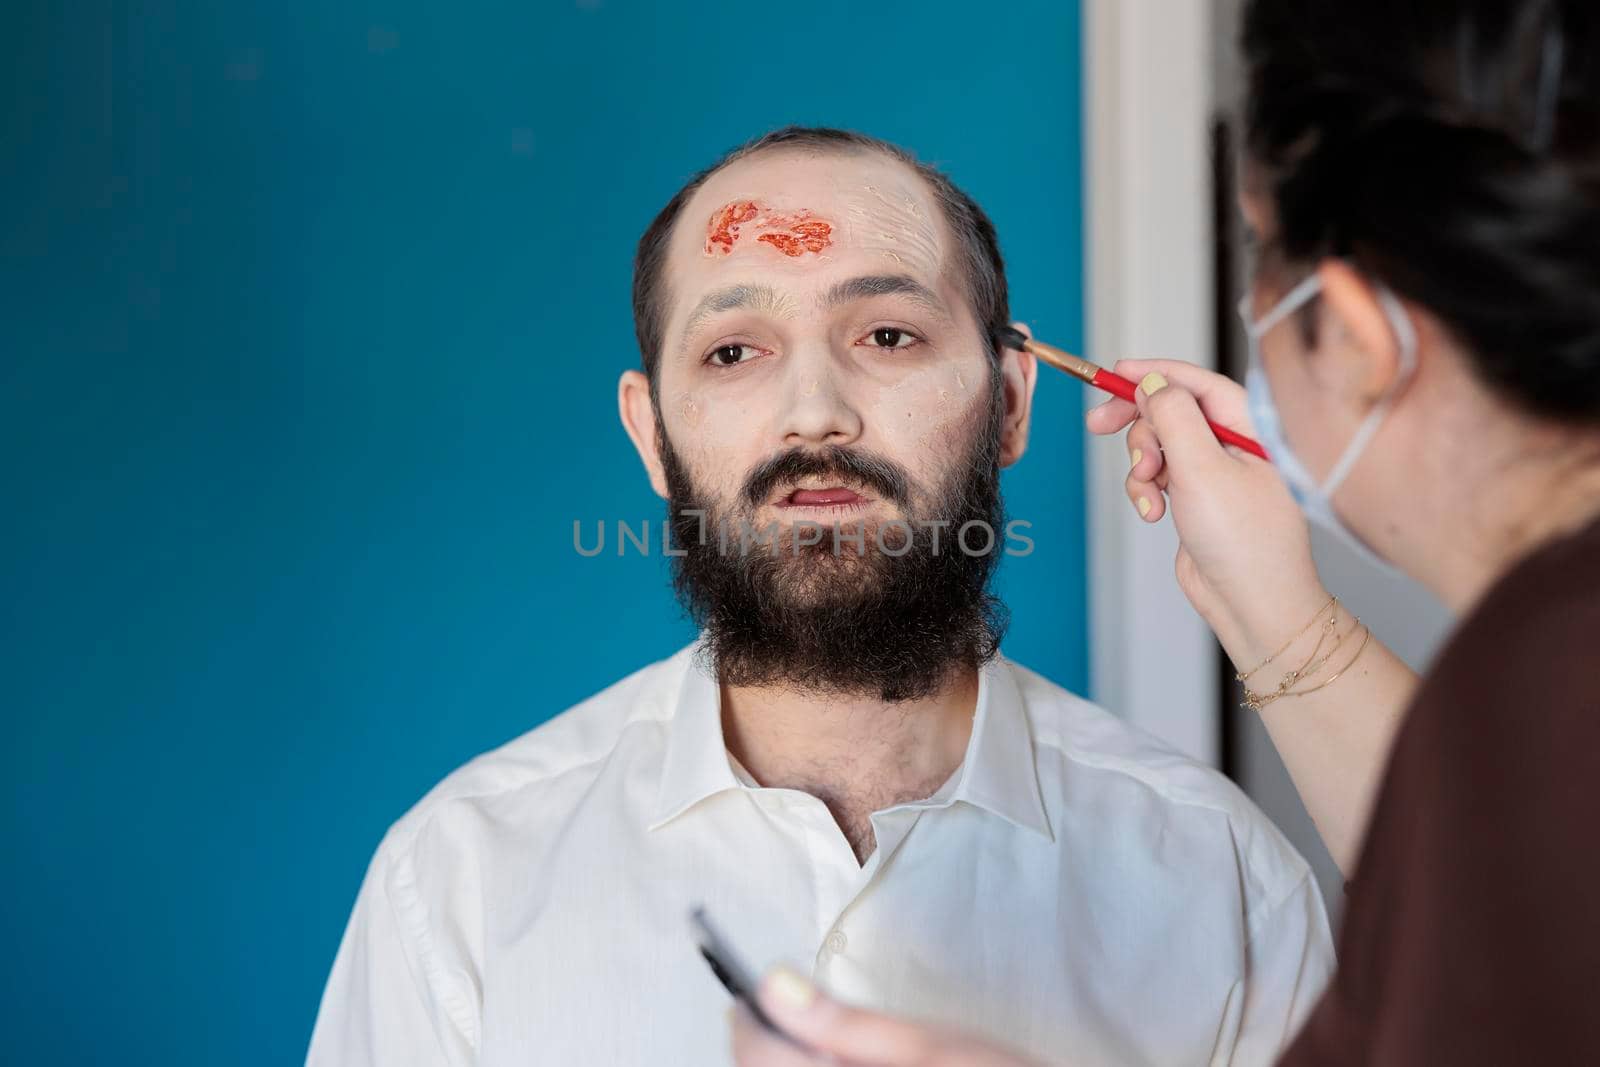 Makeup artist using special effects to create zombie costume and scary dramatic corpse look. Man looking deceased and infected after having bloody scars and monster face, creepy design.